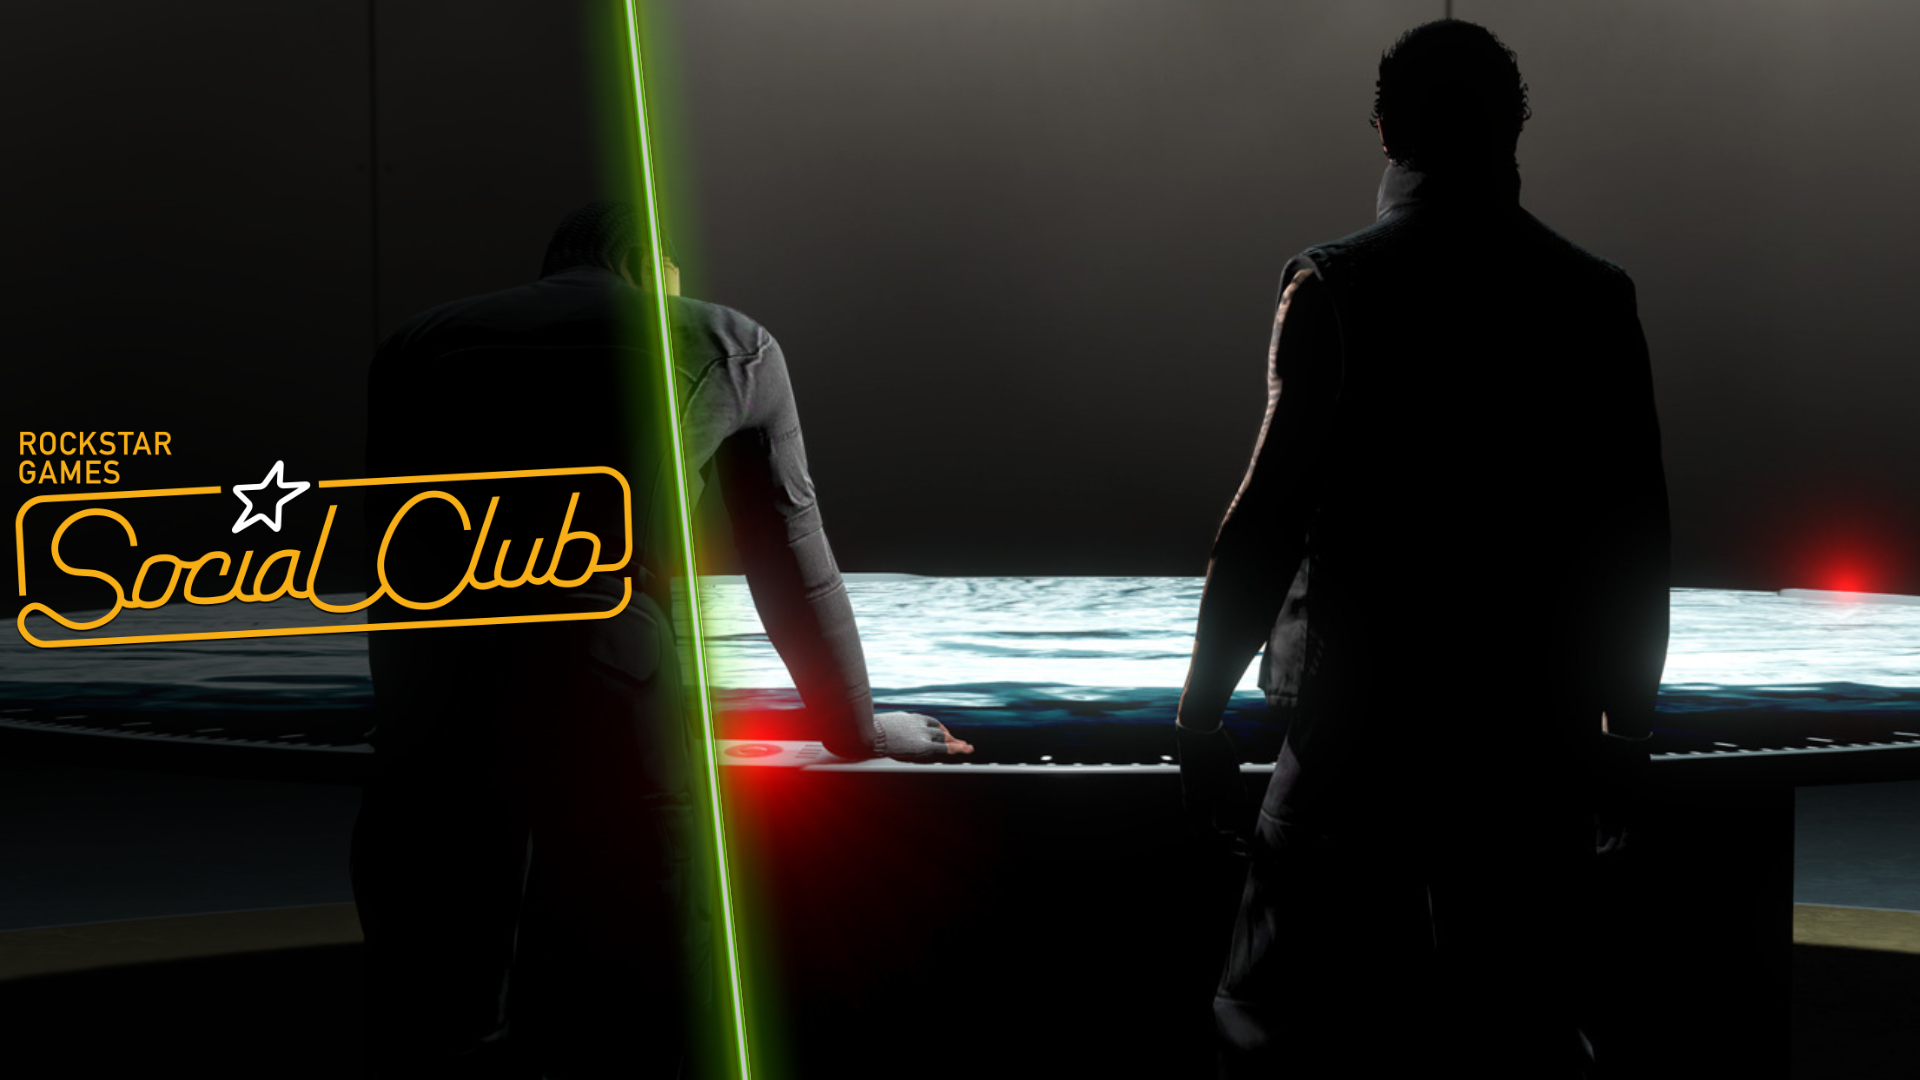 Max Payne 3 supported by revamped Rockstar Games Social Club